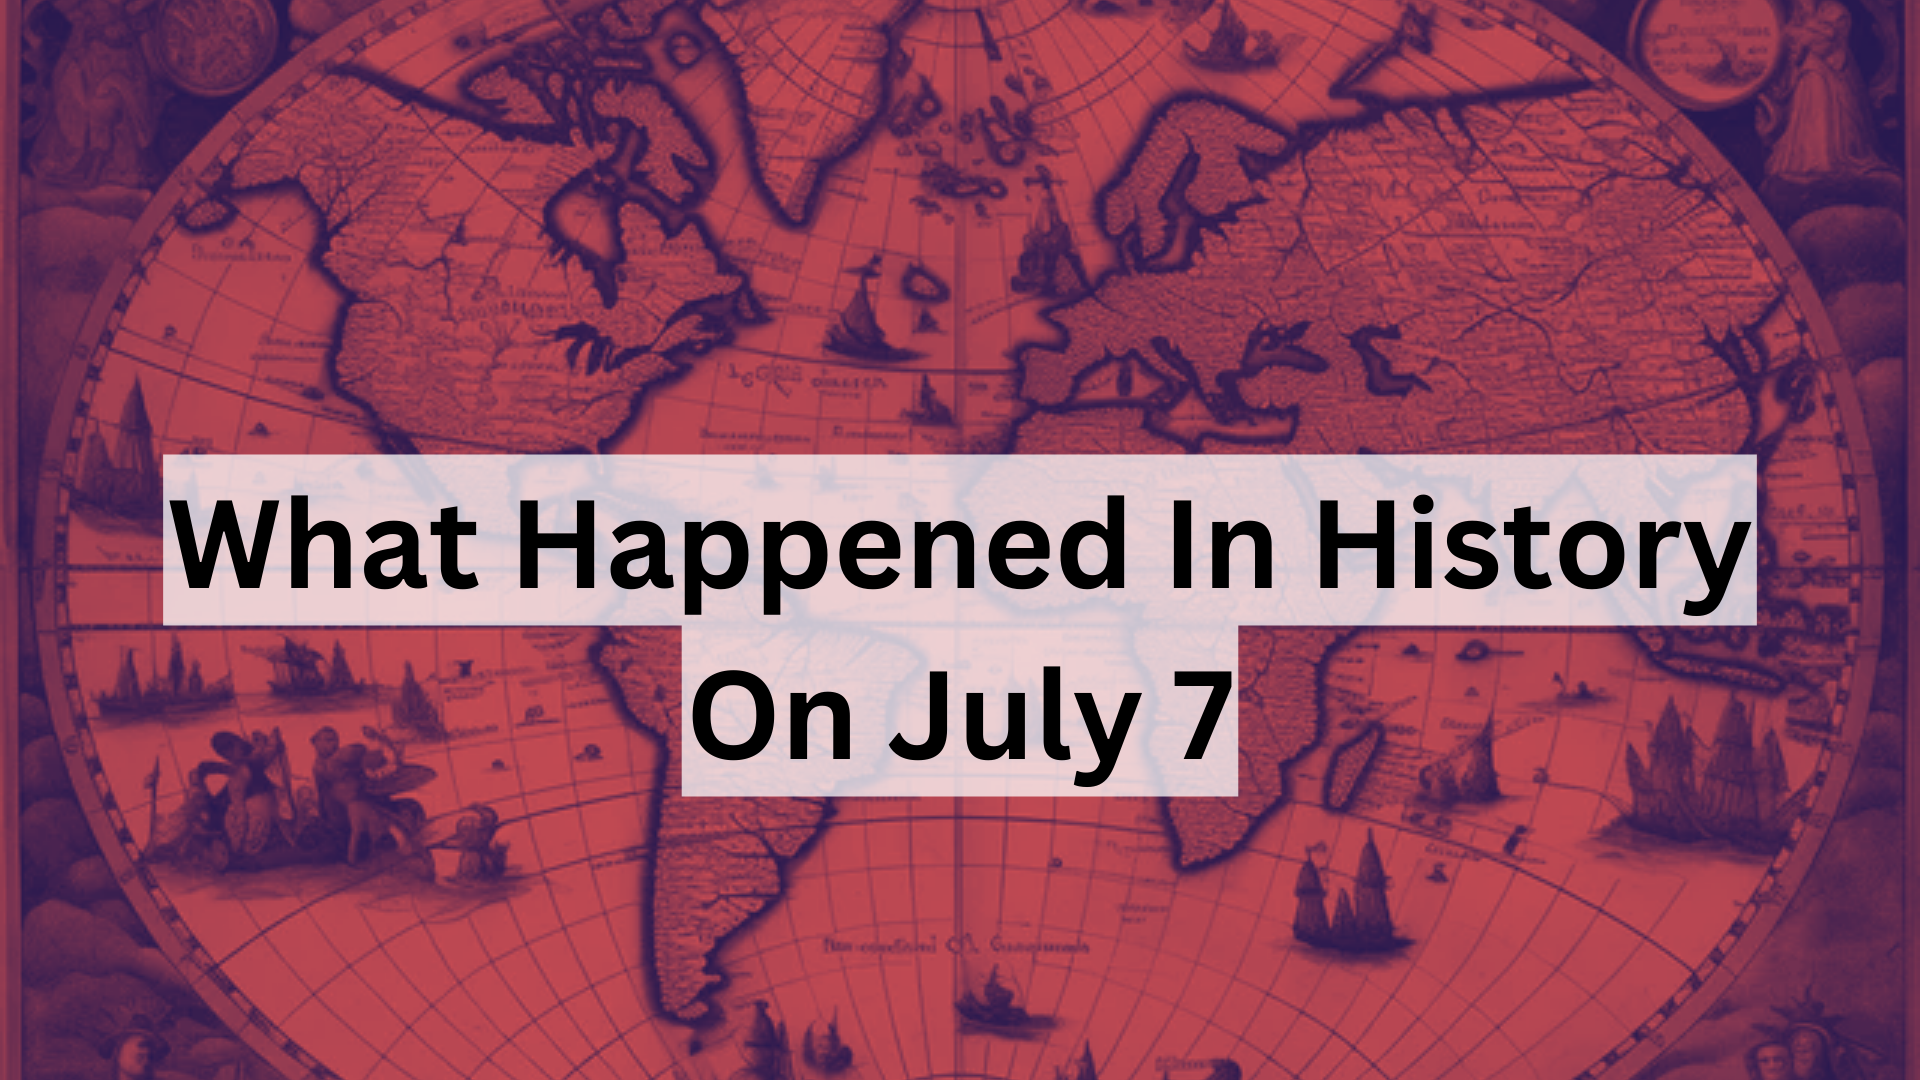 What Happened Today In History? From MS Dhoni’s Birthday To Terrorist Attacks